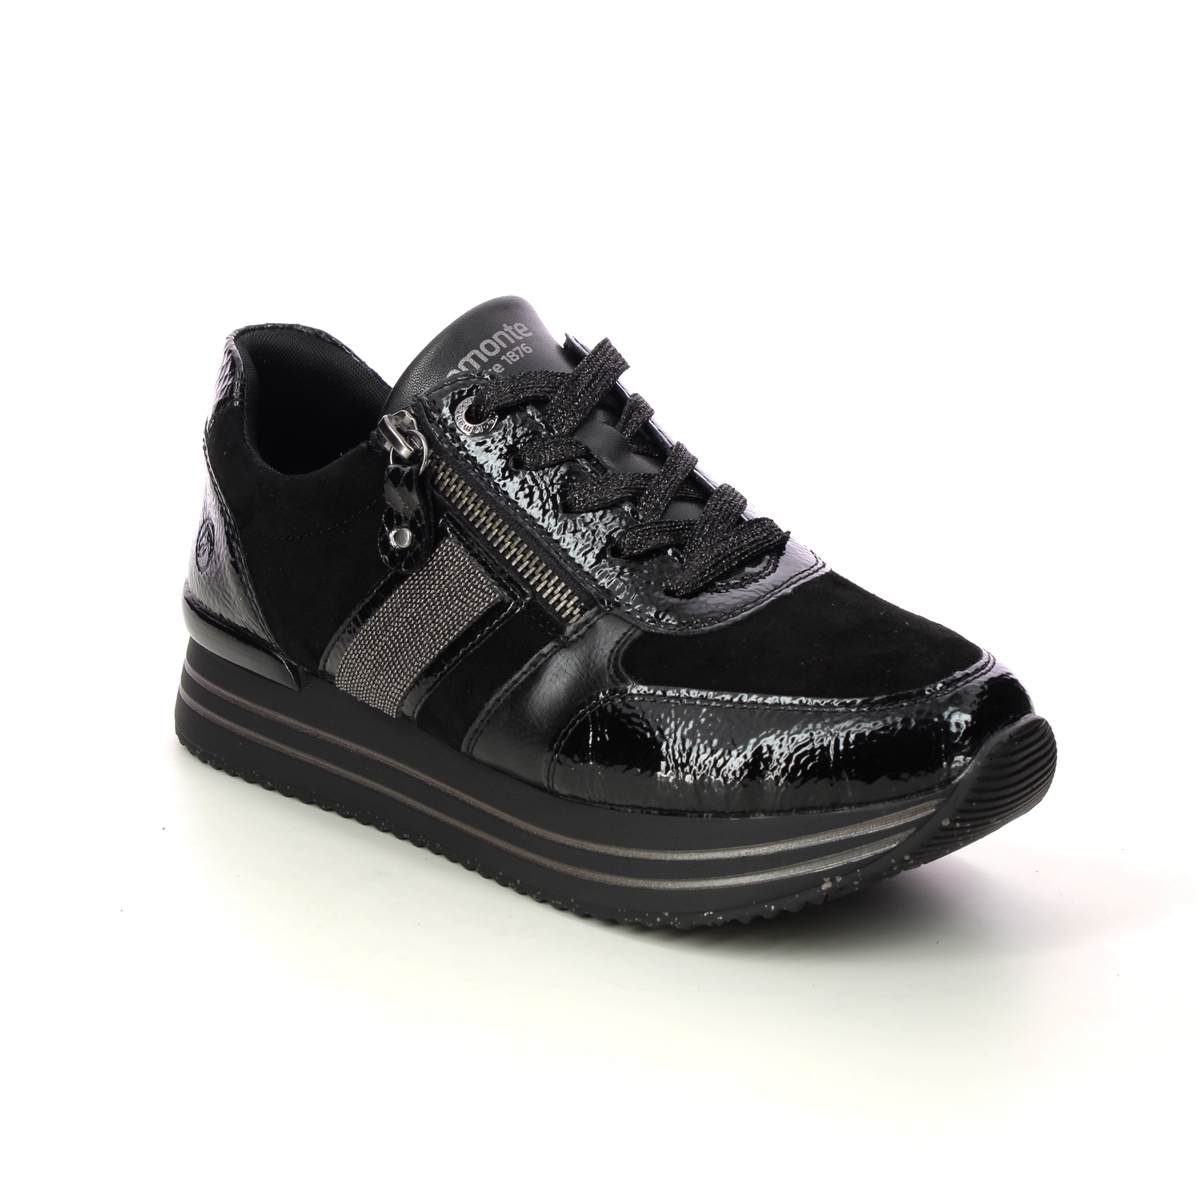 Remonte Ranger Black Patent Suede Womens Trainers D1321-01 In Size 39 In Plain Black Patent Suede